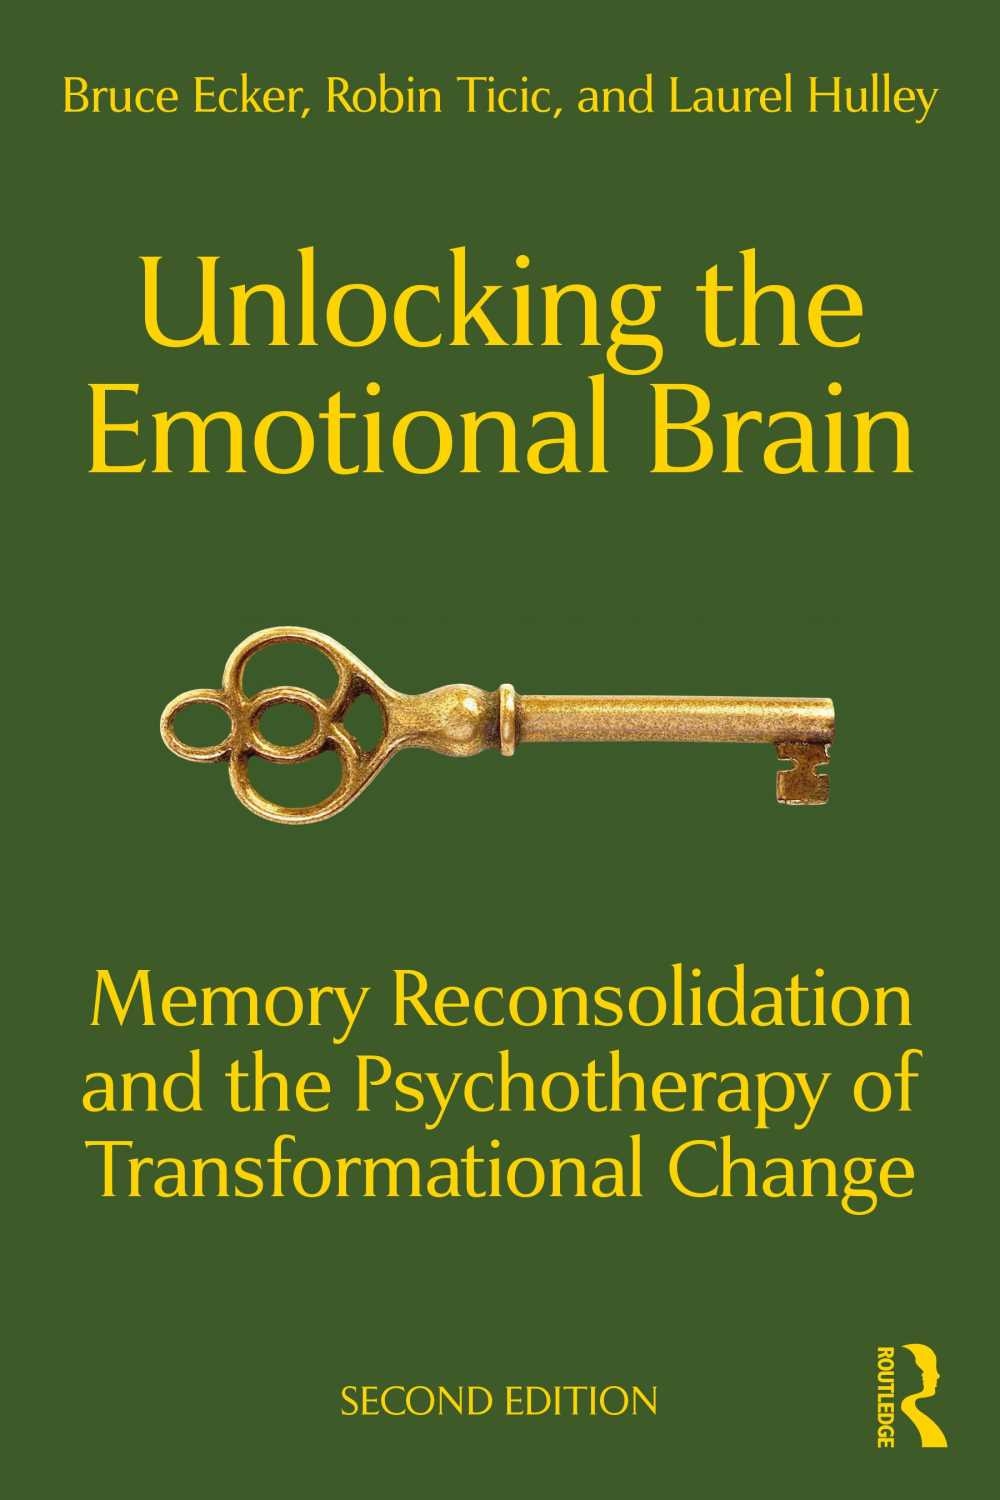 Unlocking the Emotional Brain: Memory Reconsolidation and the Psychotherapy of Transformational Change